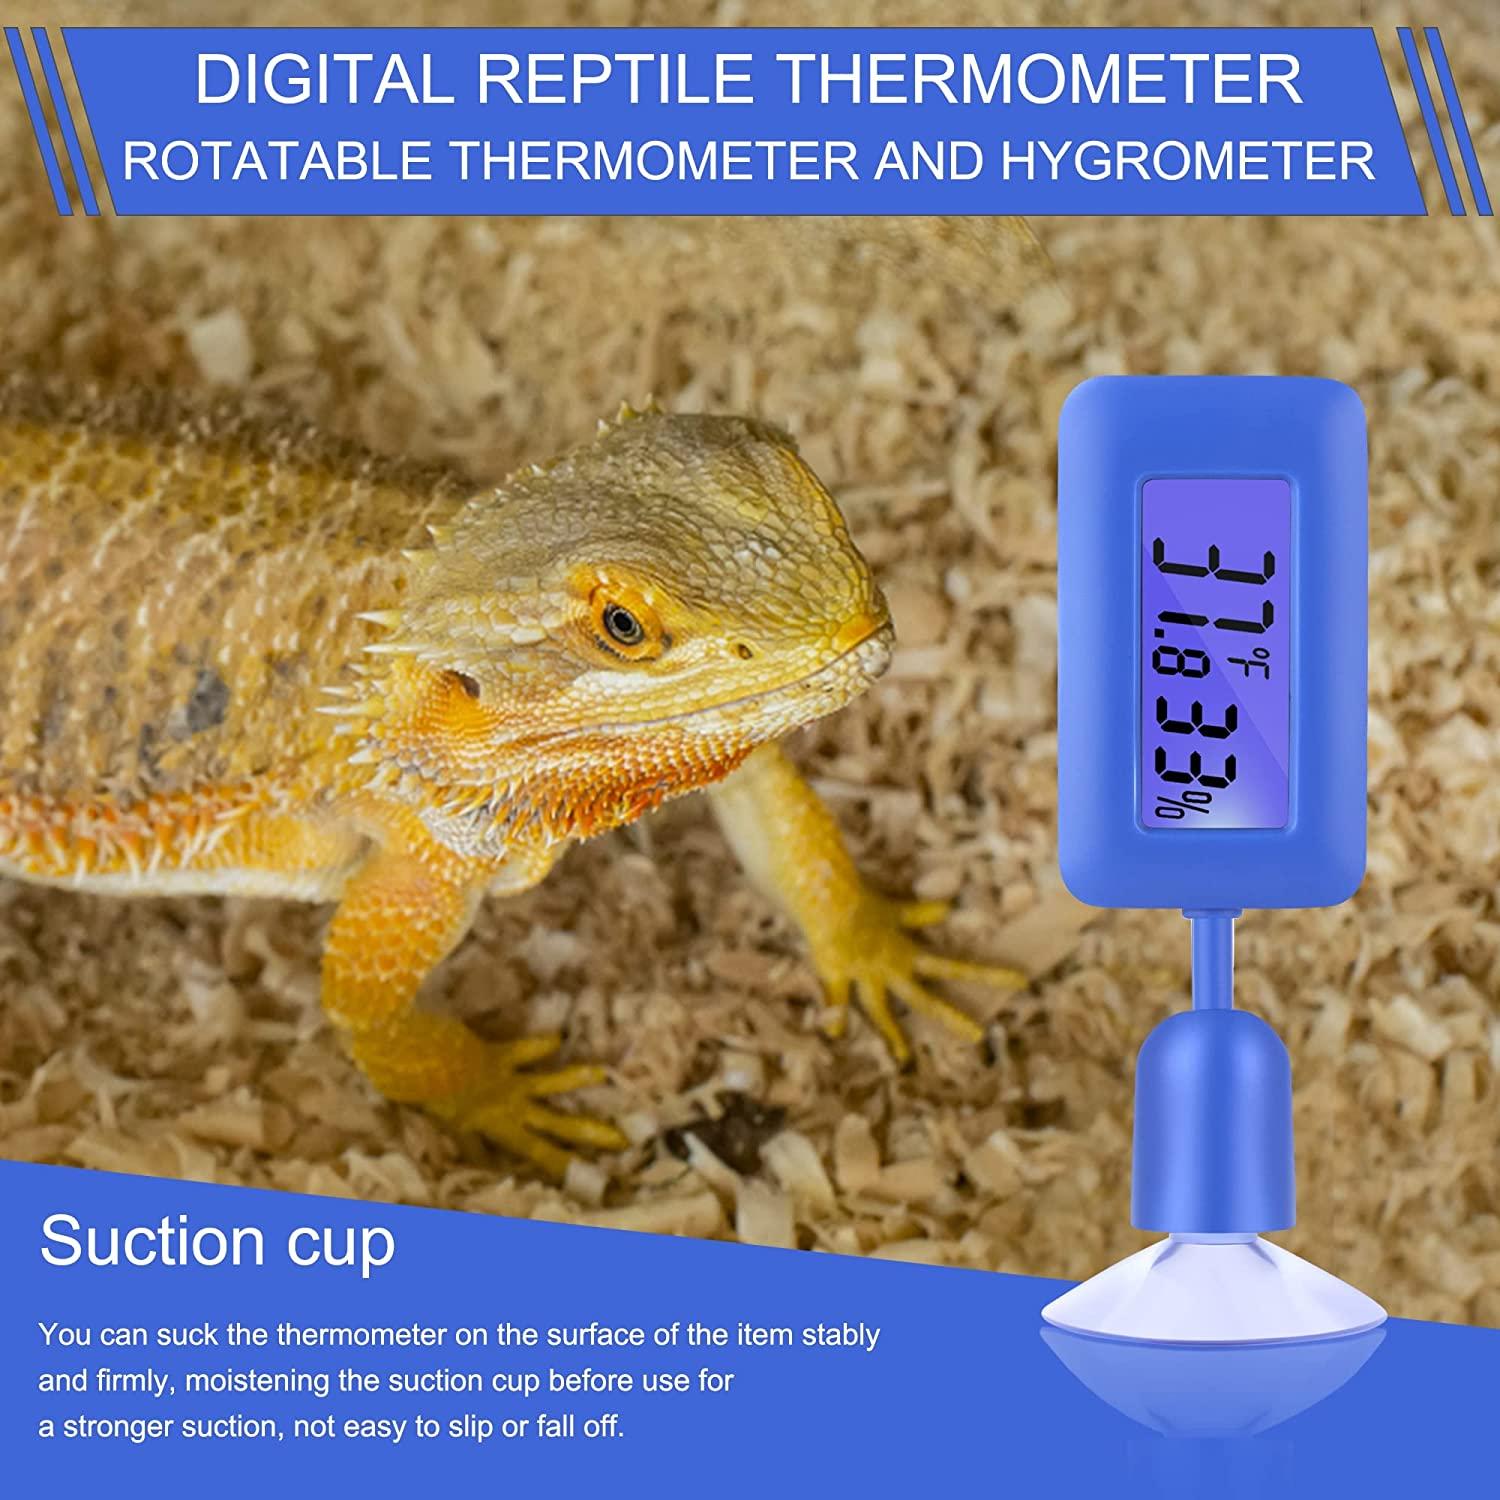 Reptile Thermometer,Reptile Thermometer and Humidity Gauge,Digital